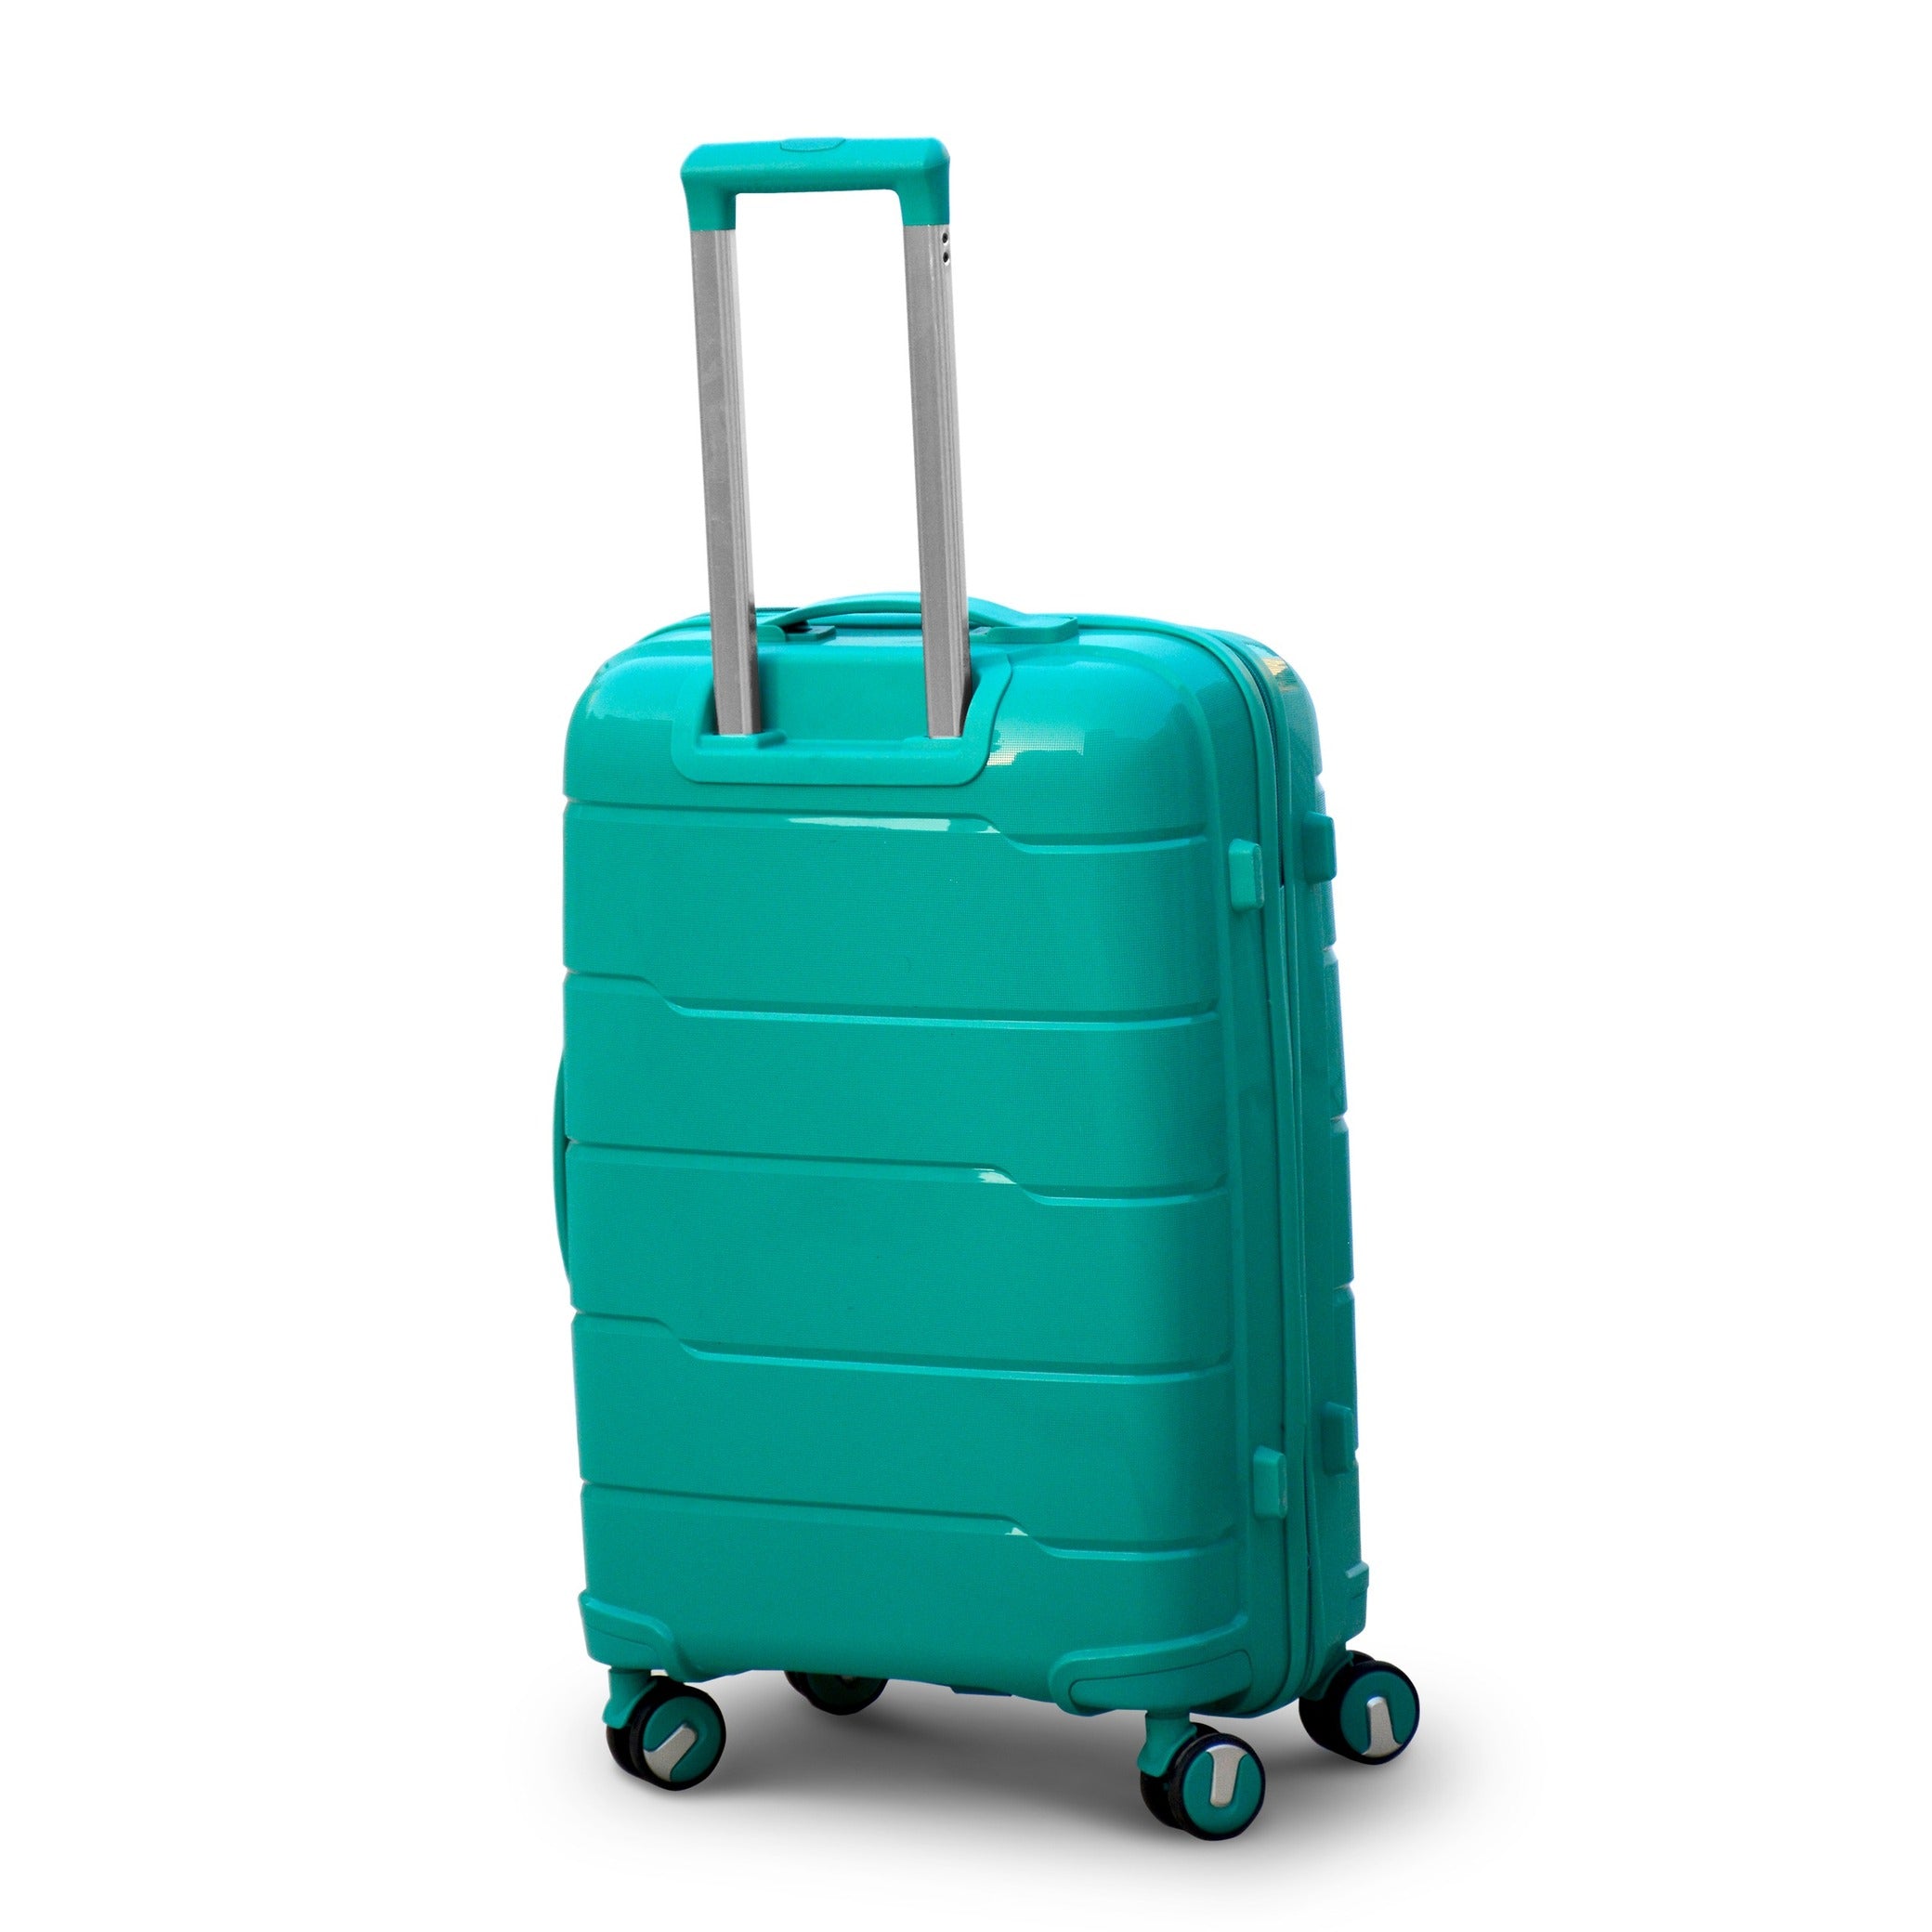 Unbreakable Carry On Luggage Bags 20 inch 7-10 Kg PP Material Trolley